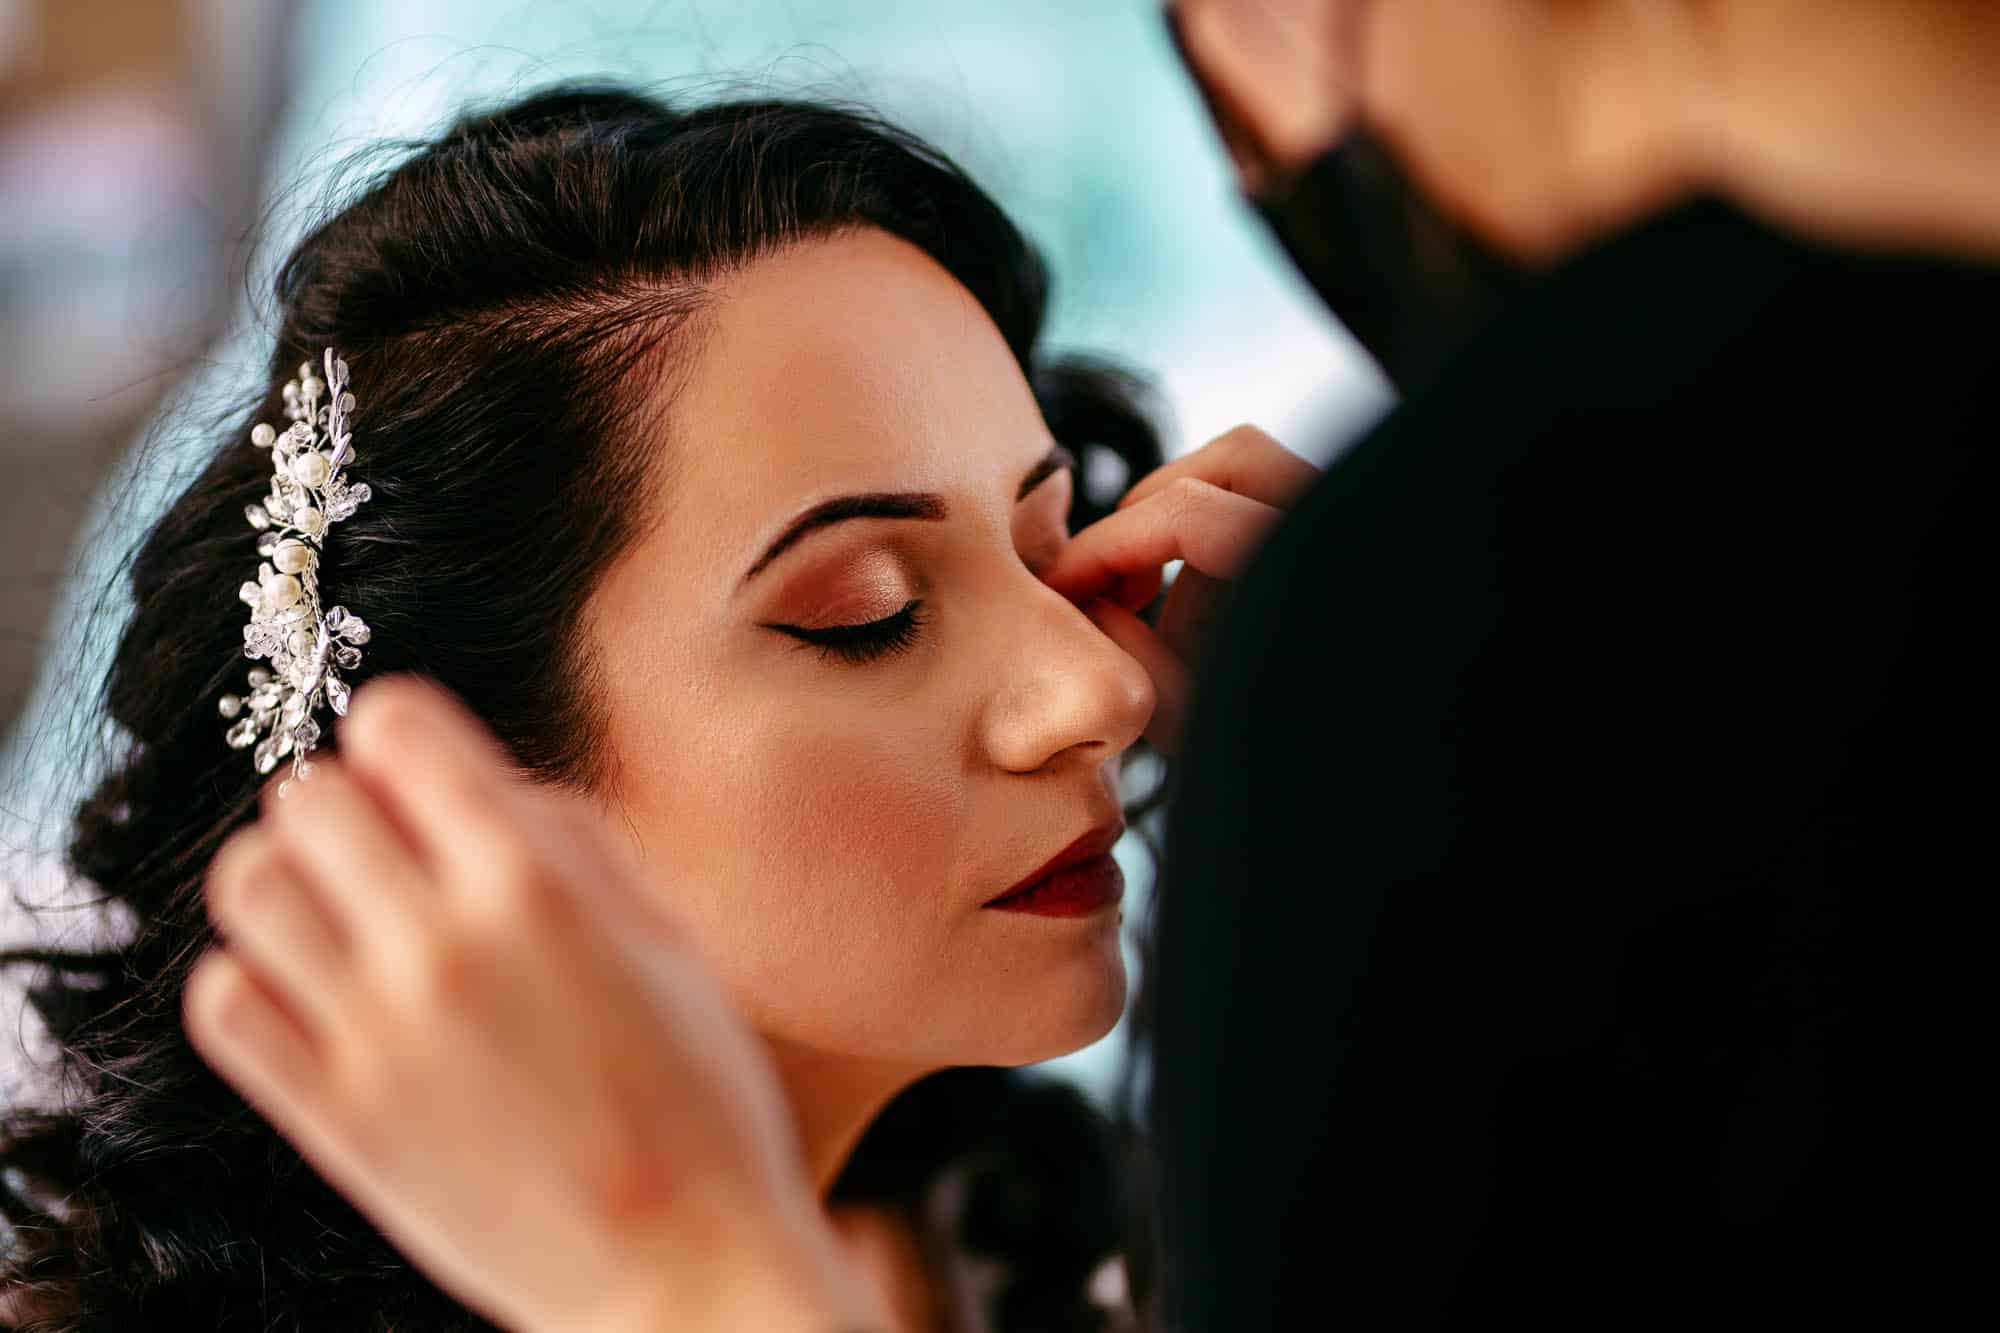 Make-up on the wedding day